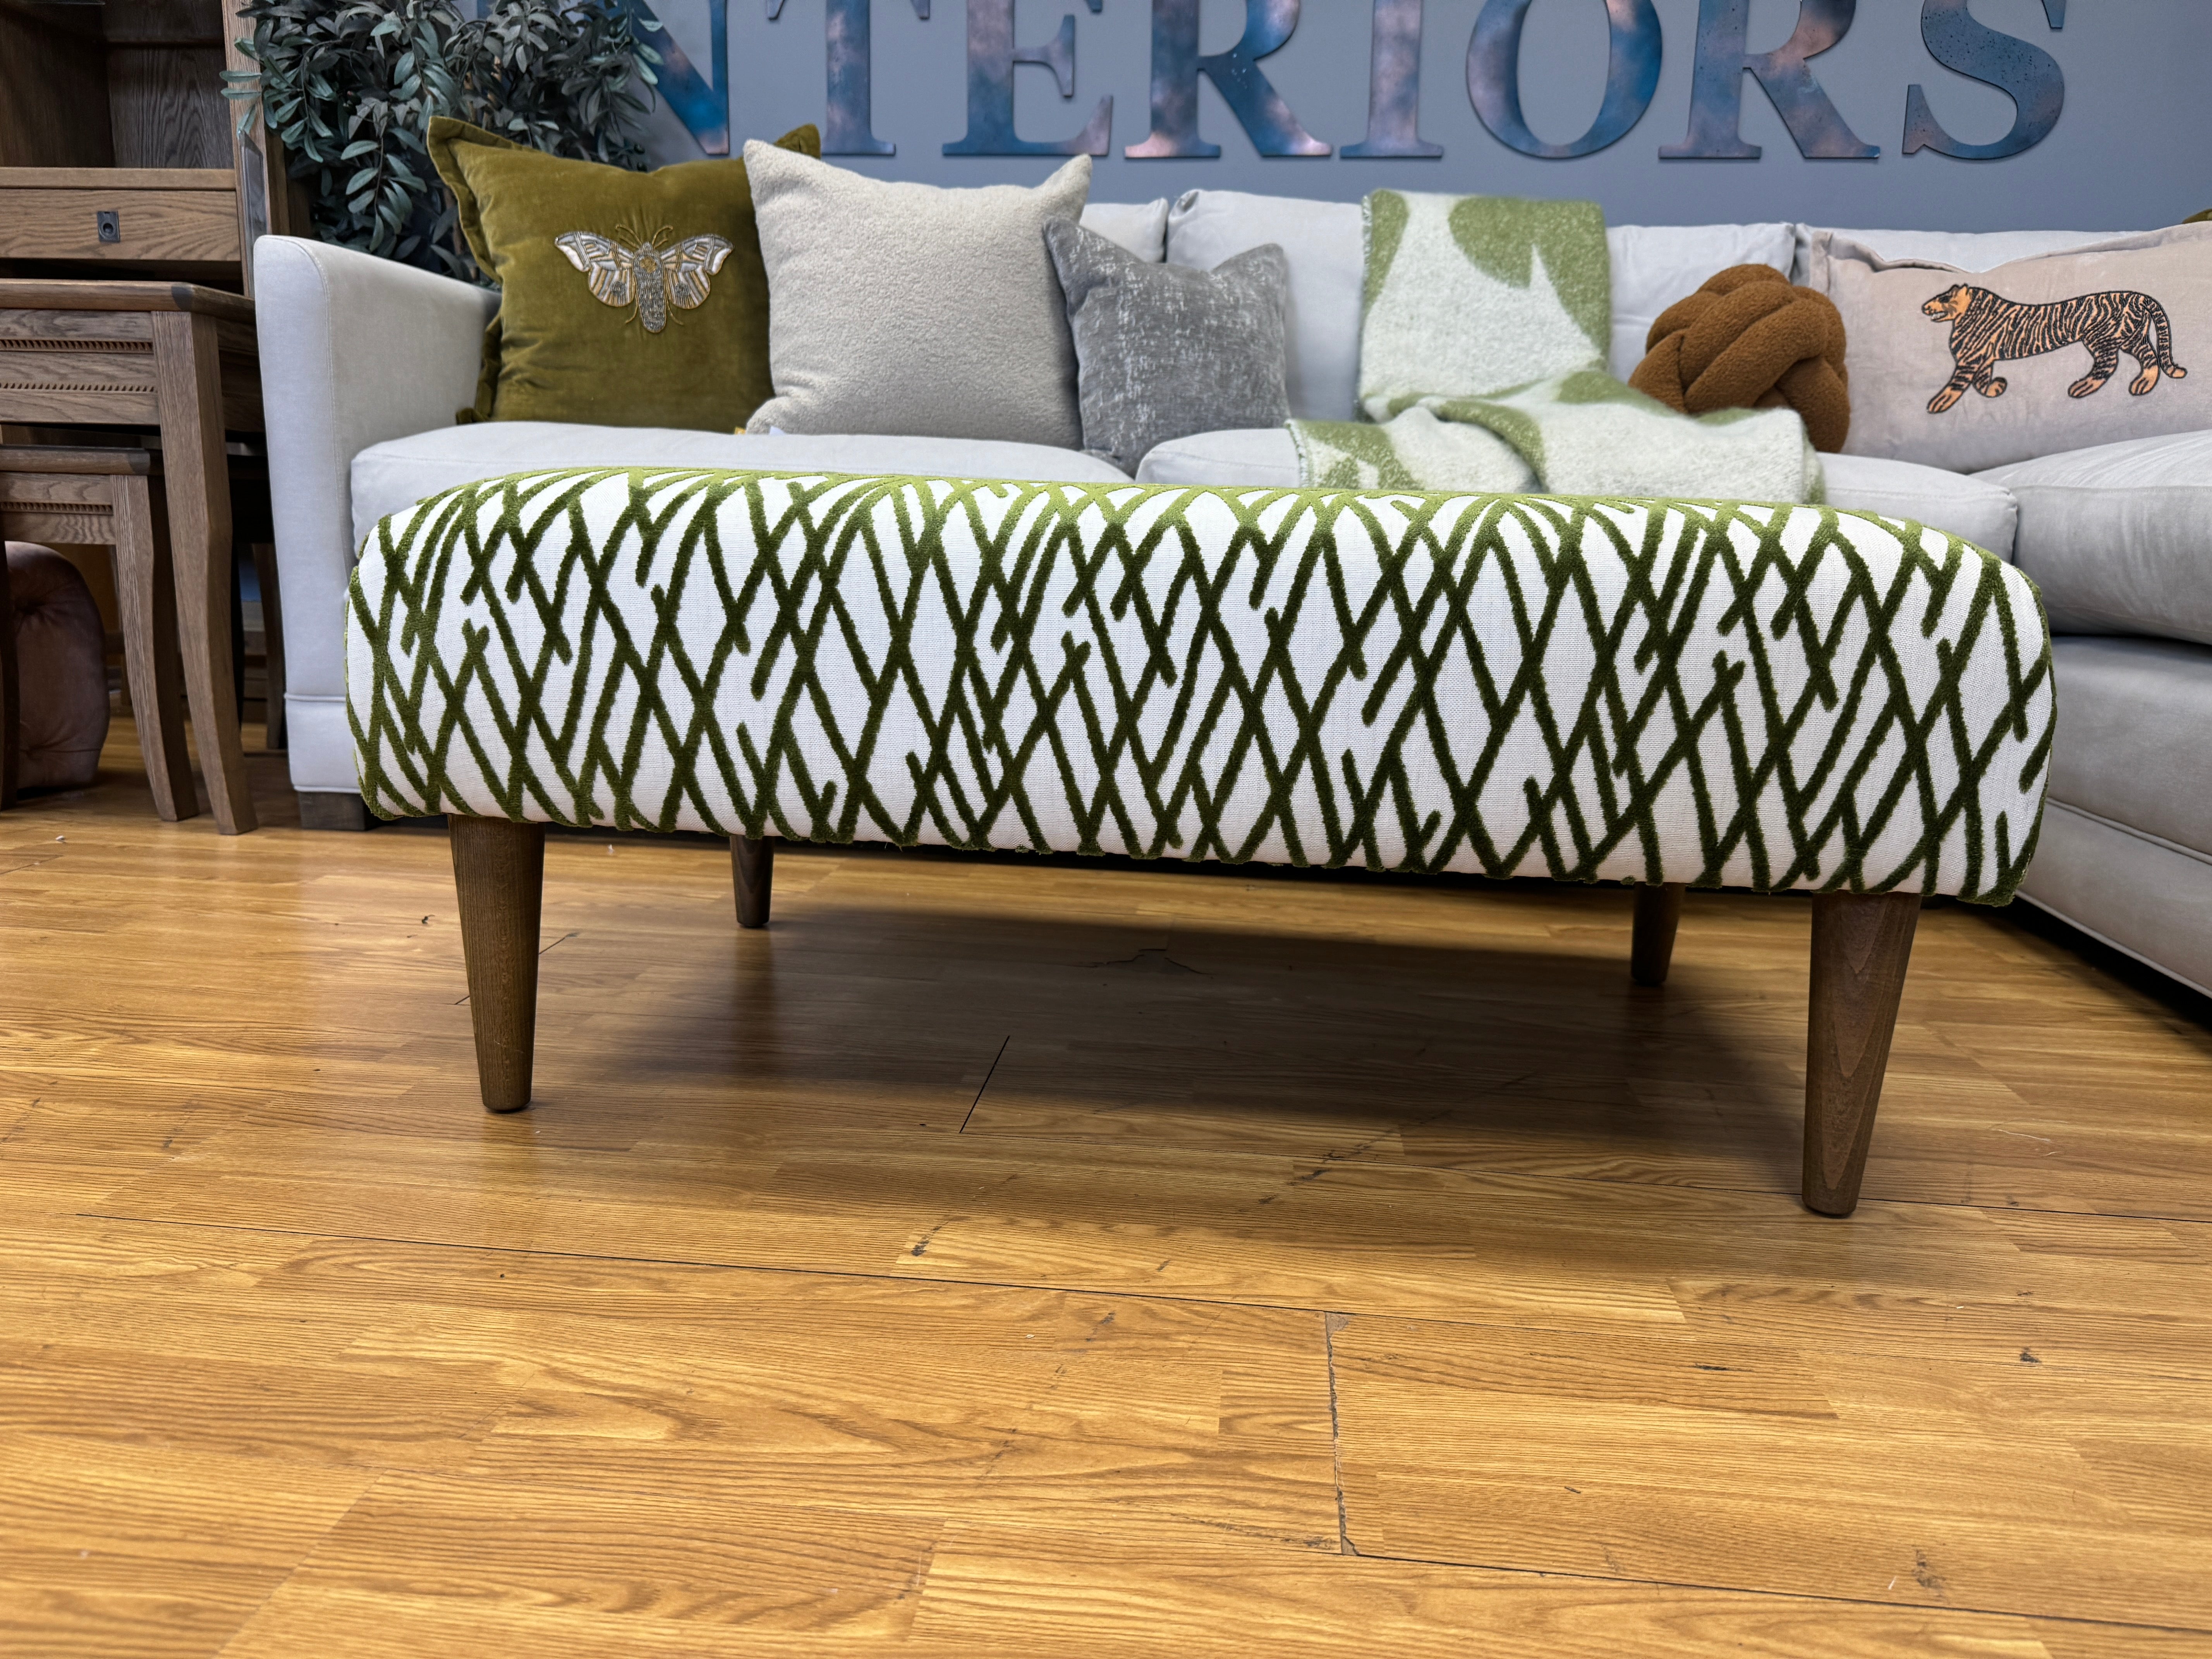 WHITE LABEL Development low bench footstool in cream and green fabric